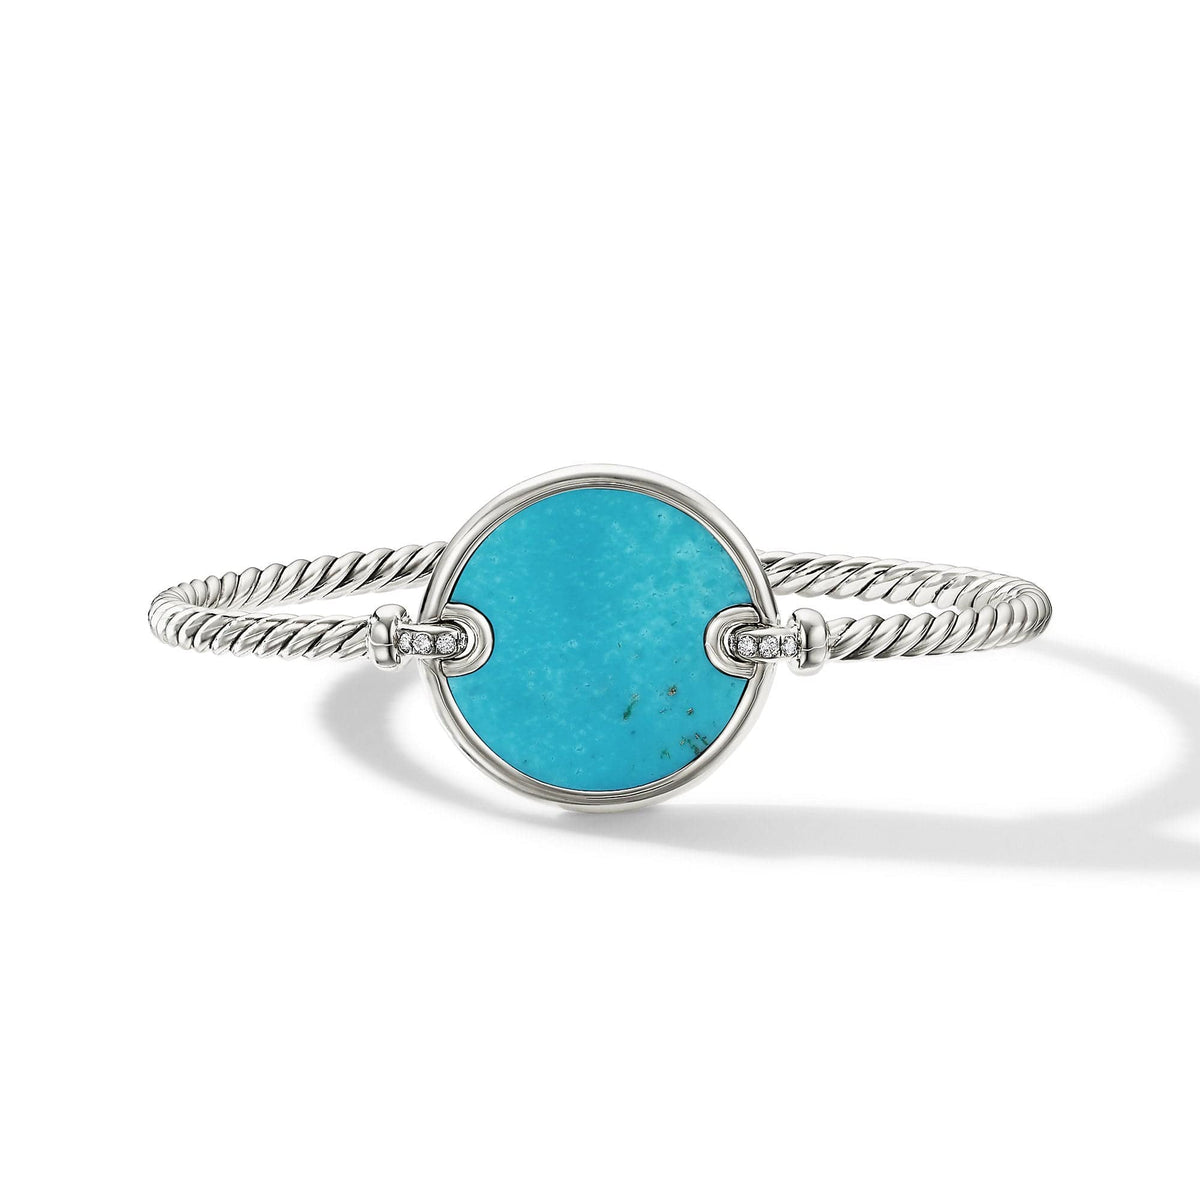 DY Elements Bracelet with Turquoise and Pavé Diamonds